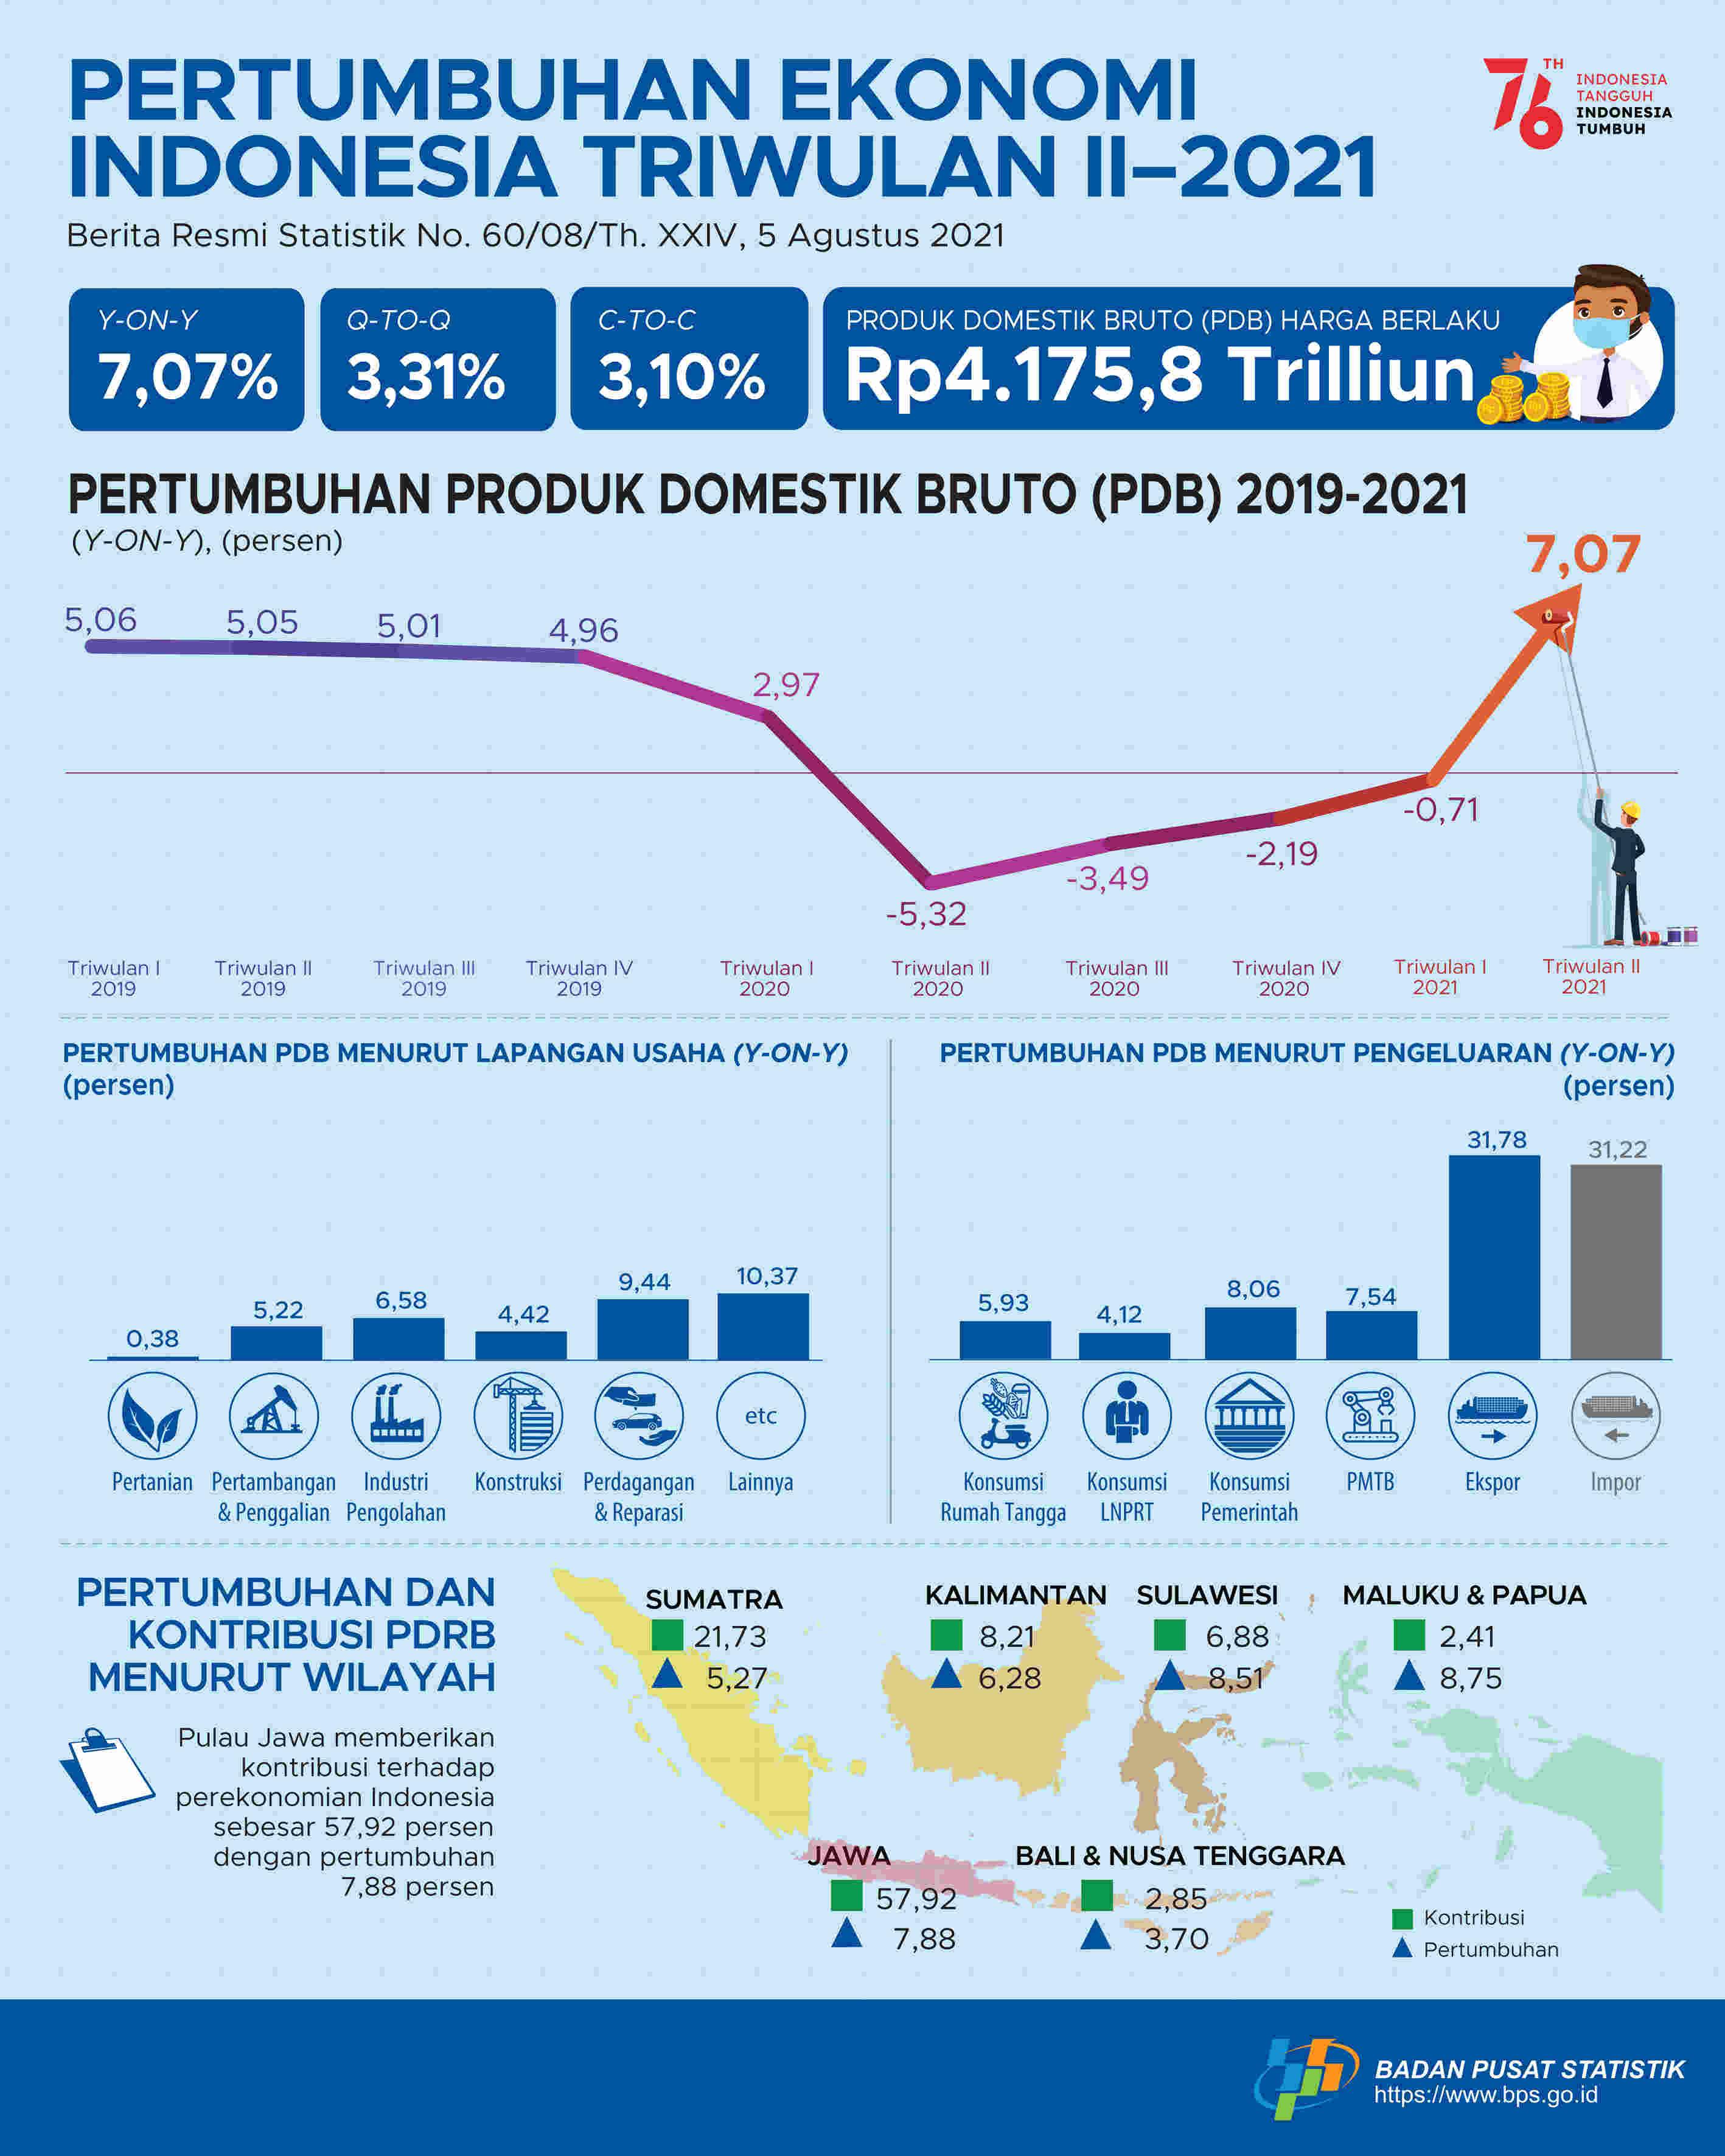 Economic Growth of Indonesia Second Quarter 2021 ascend 7.07 percent (y-on-y)